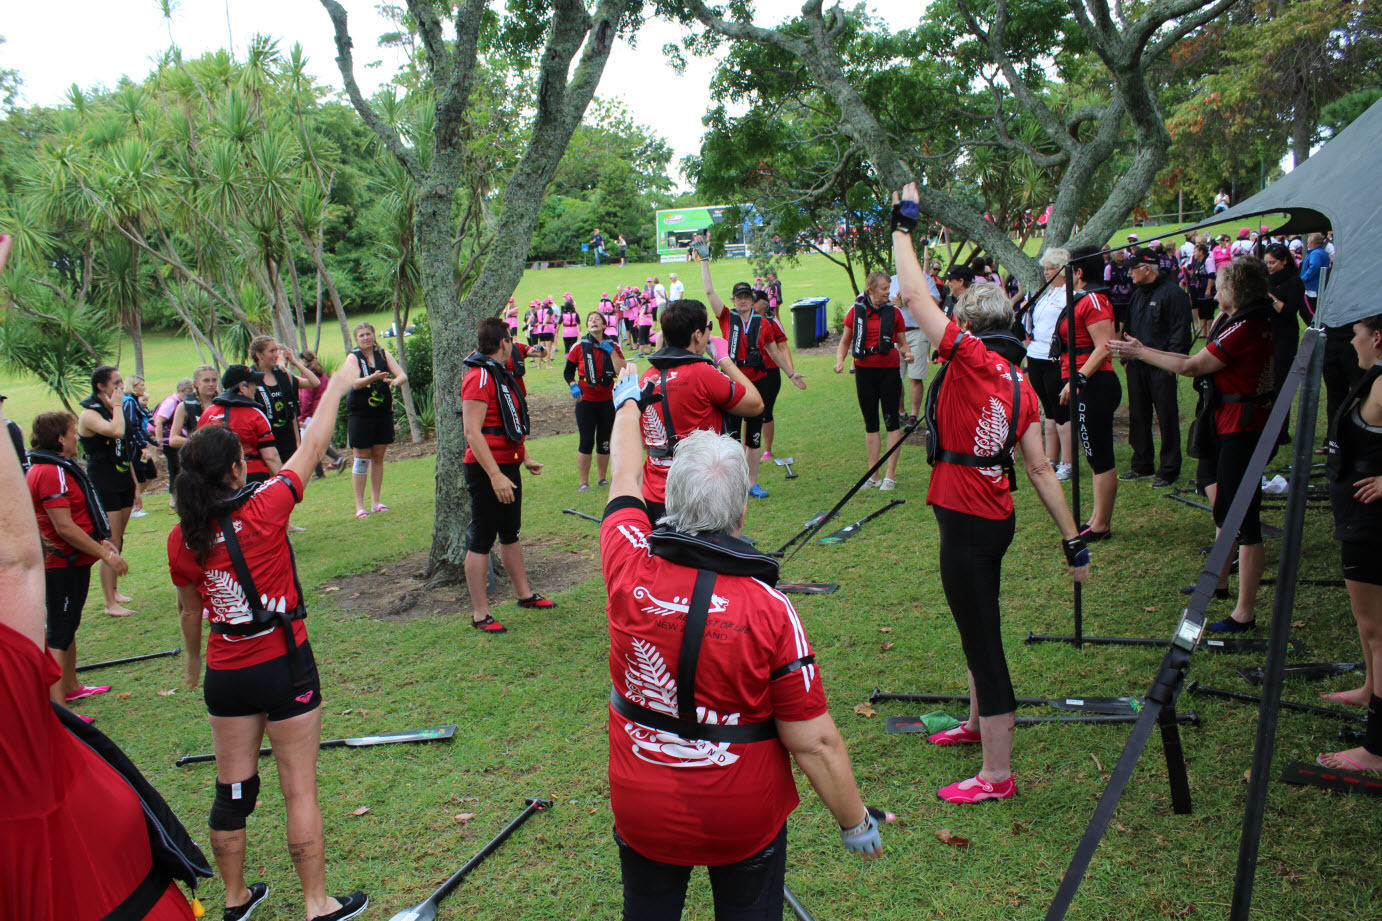 Abreast of Life Dragon Boat Team